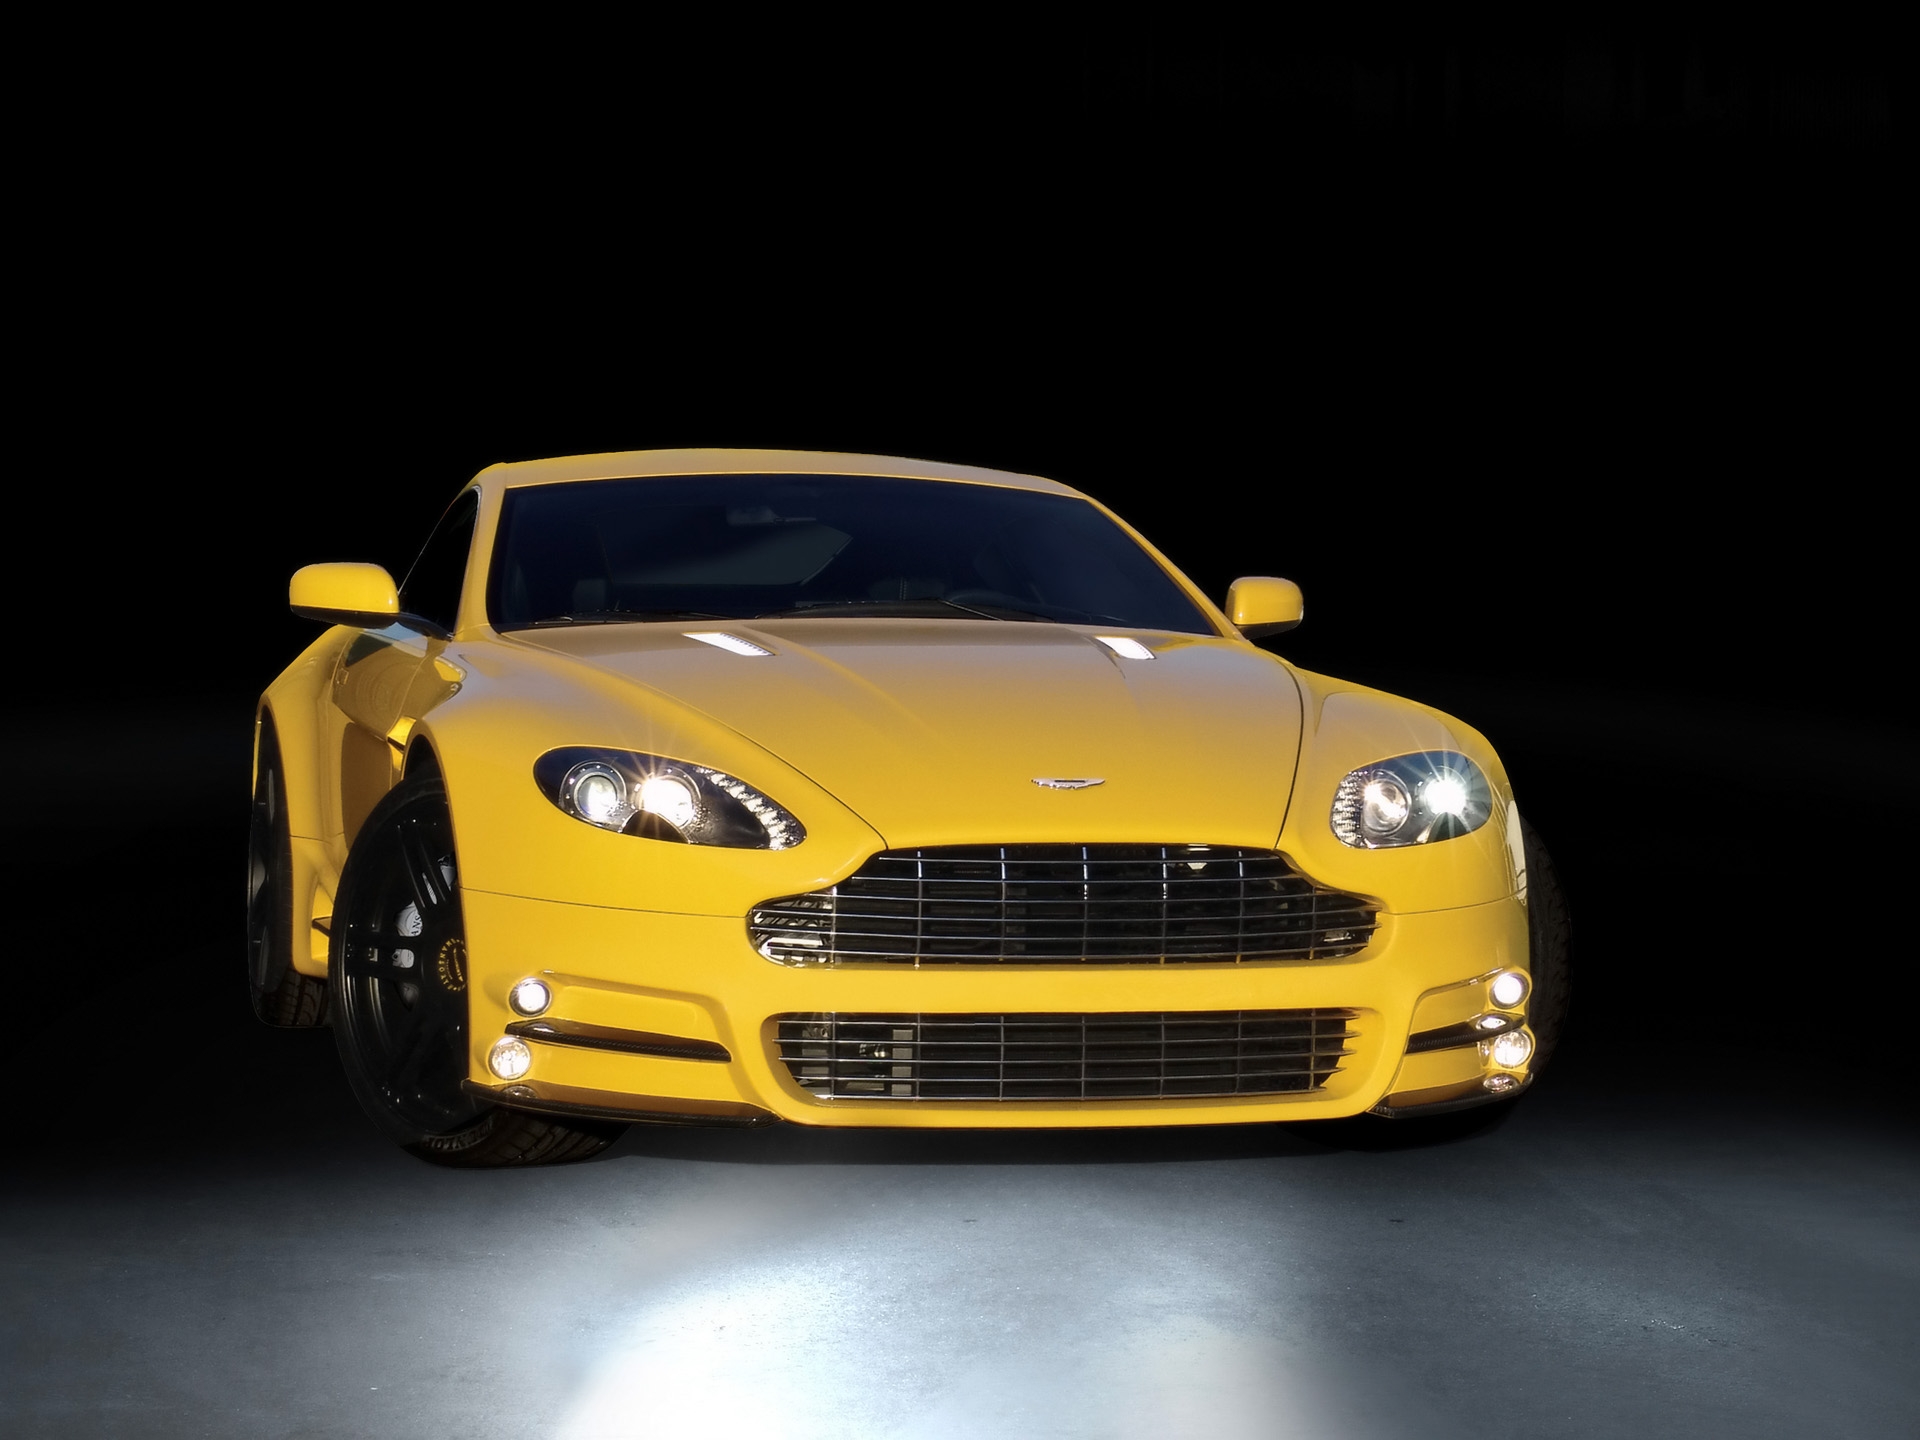 cars, sports, aston martin, yellow, front view, style, v8, vantage, mansory High Definition image